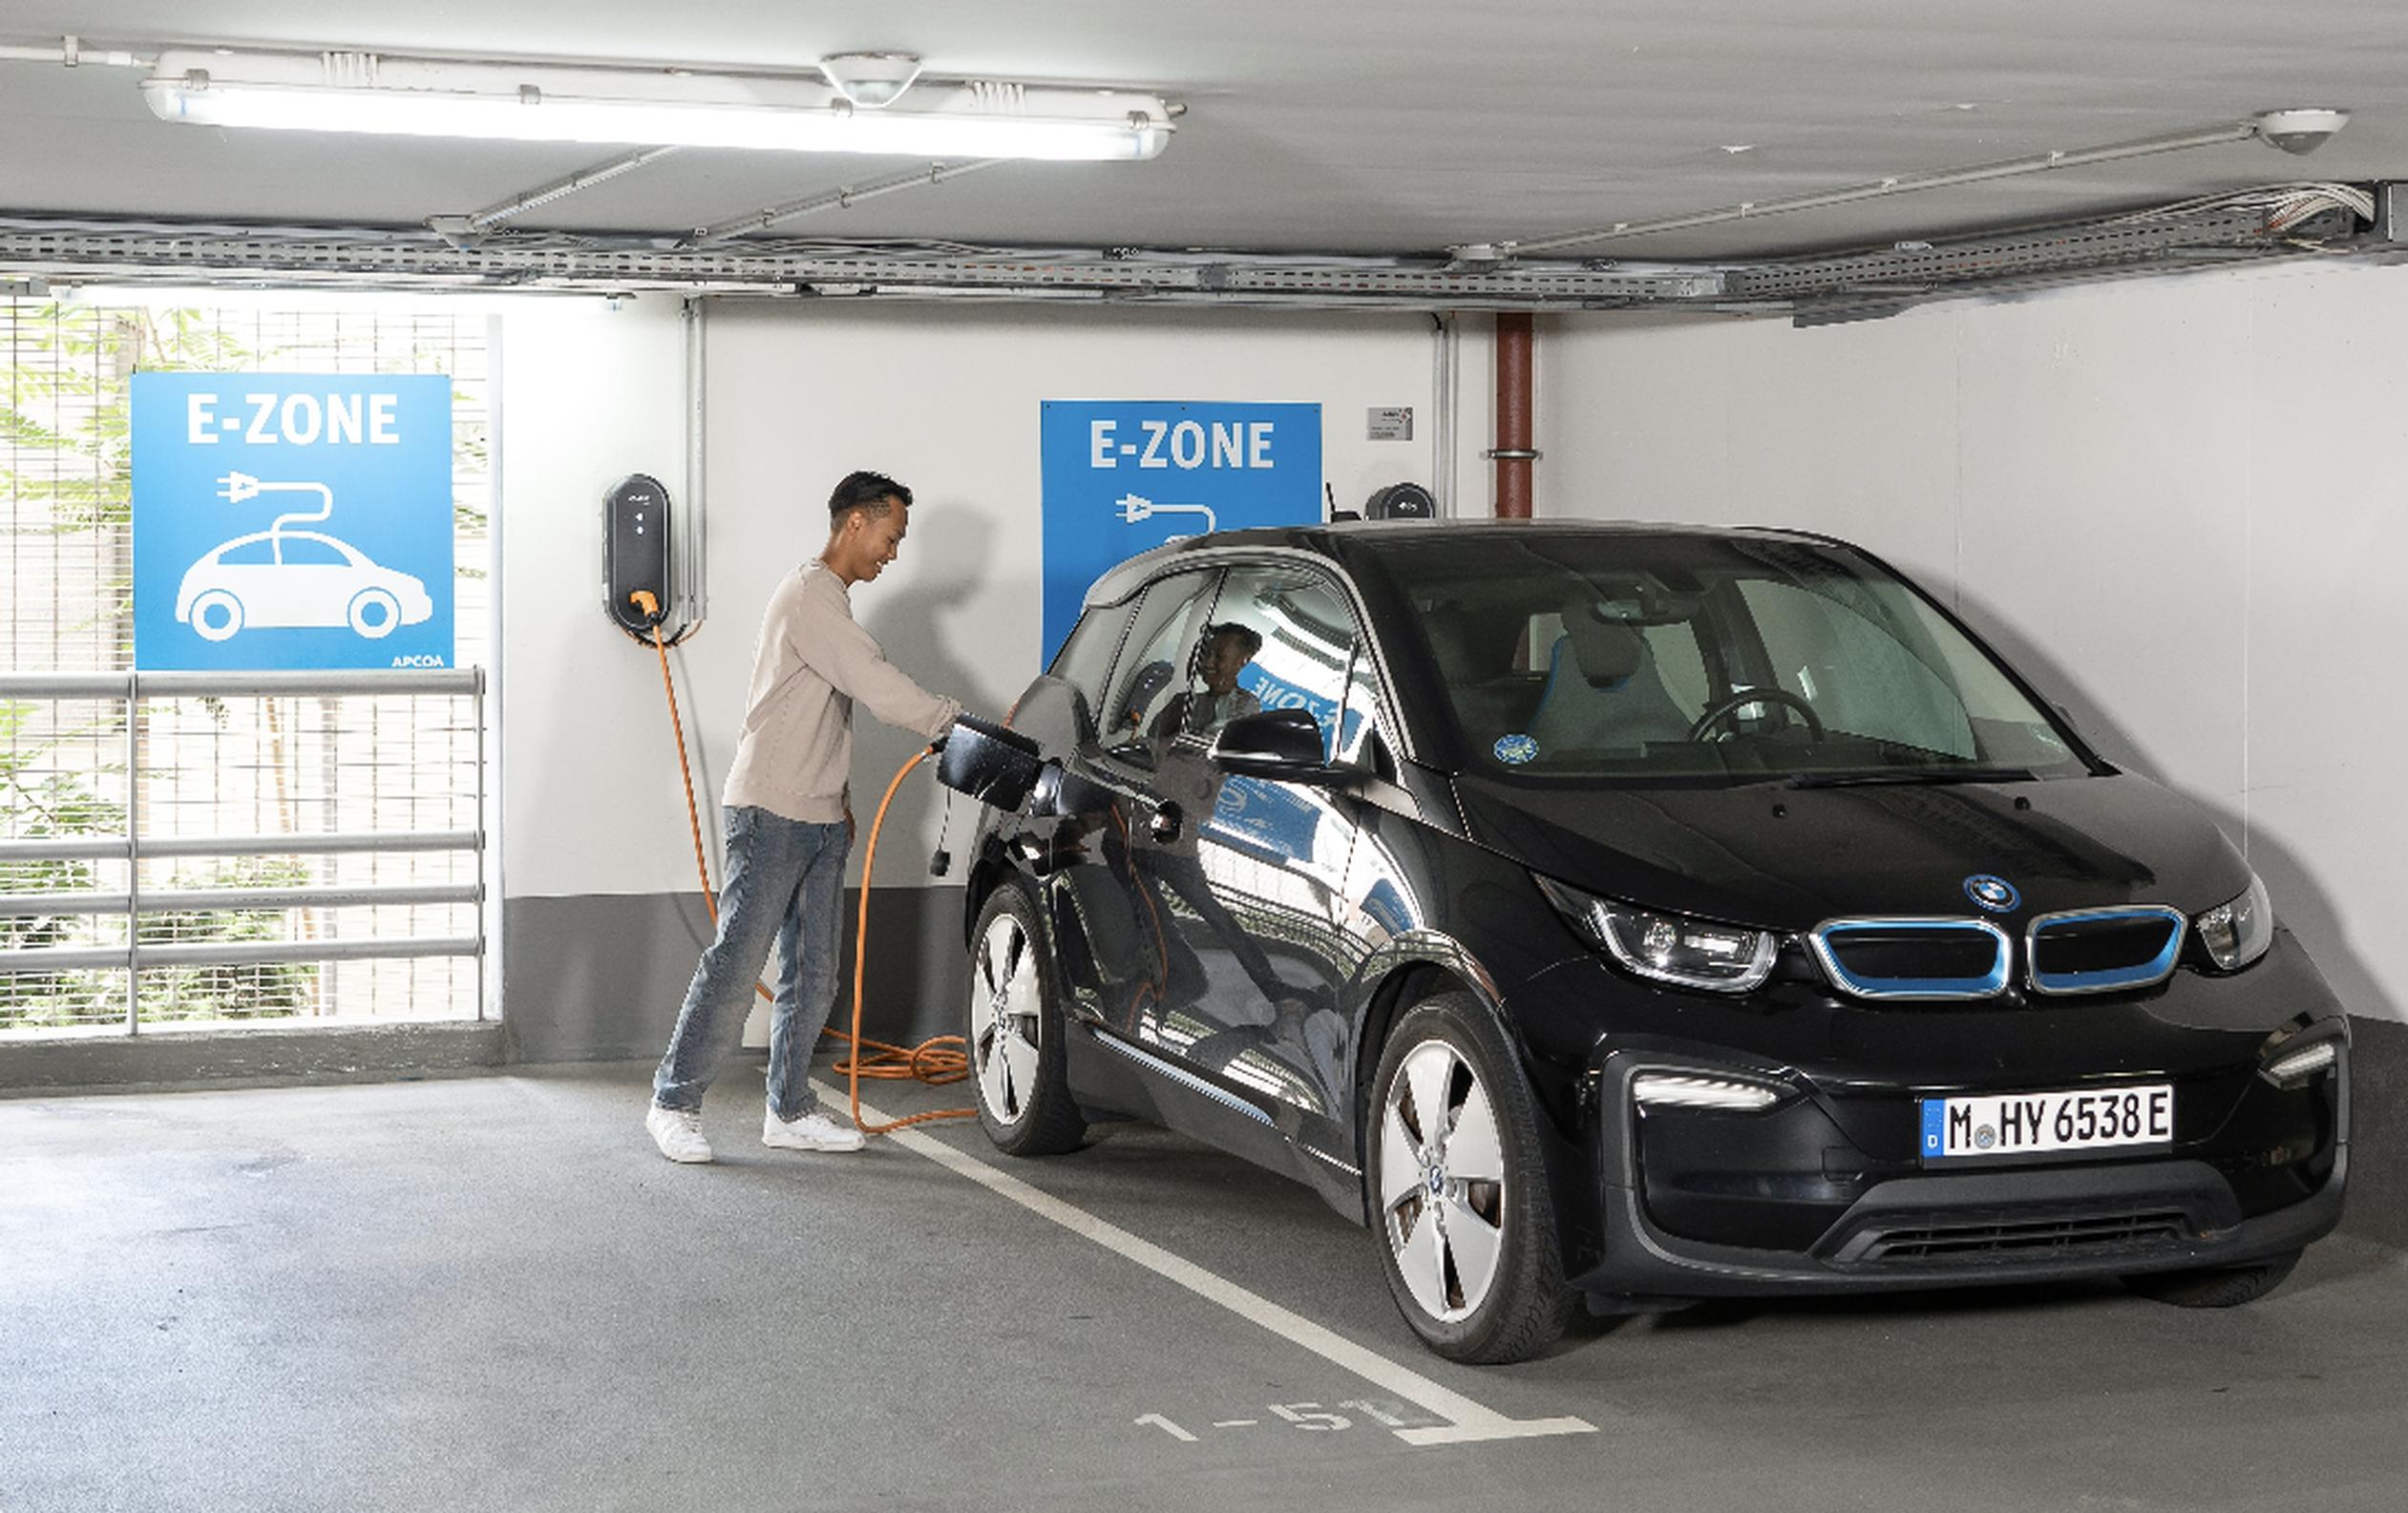 APCOA Parking has announced plans to deploy up to 100,000 new electric vehicle charging stations in its parking facilities across Europe by 2035